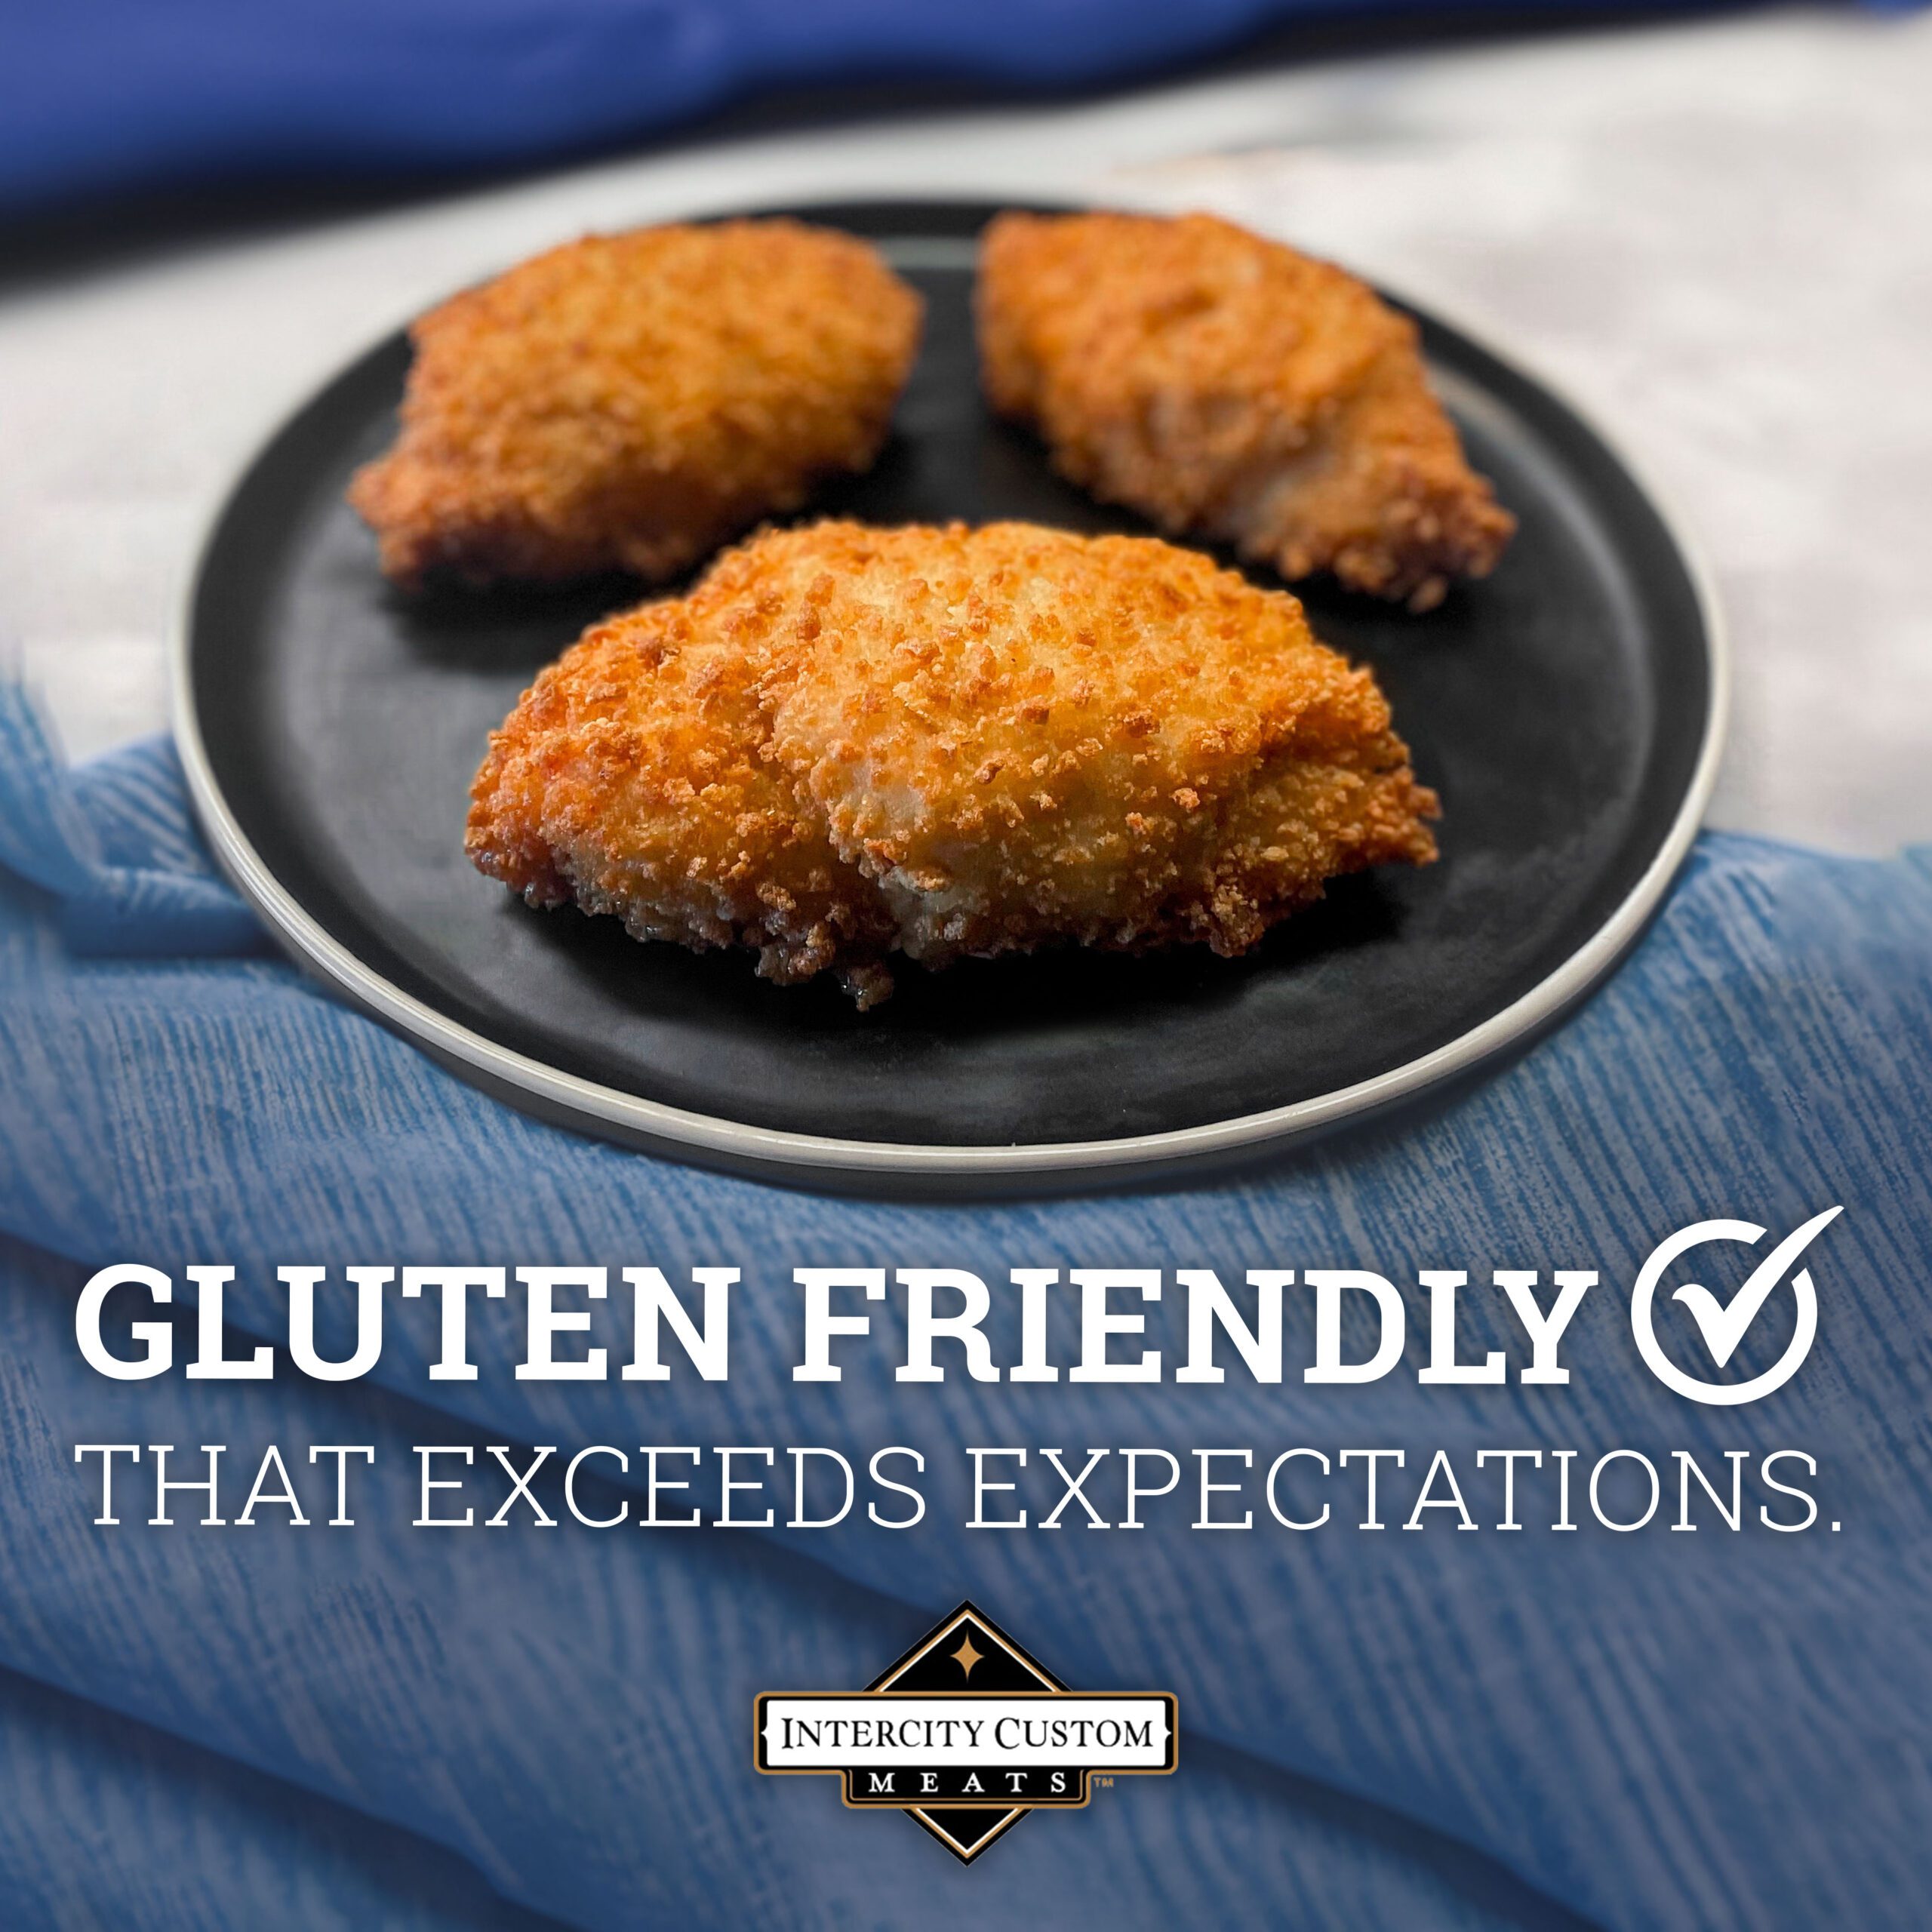 Exceed expectations with gluten-friendly stuffed chicken cordons